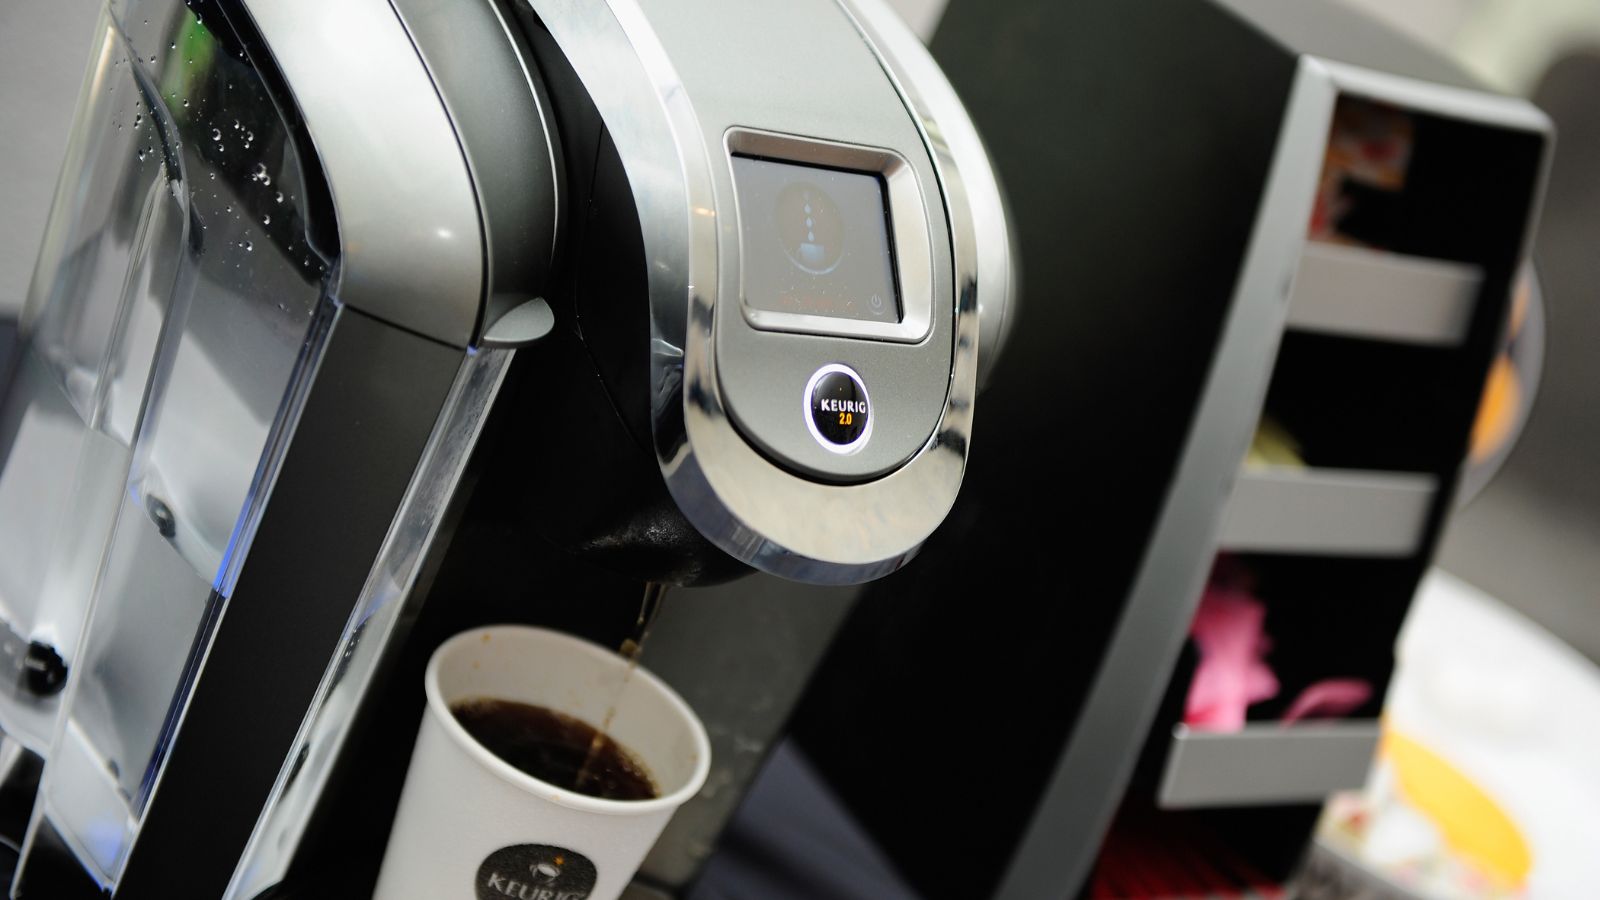 How to know if your Keurig needs descaling